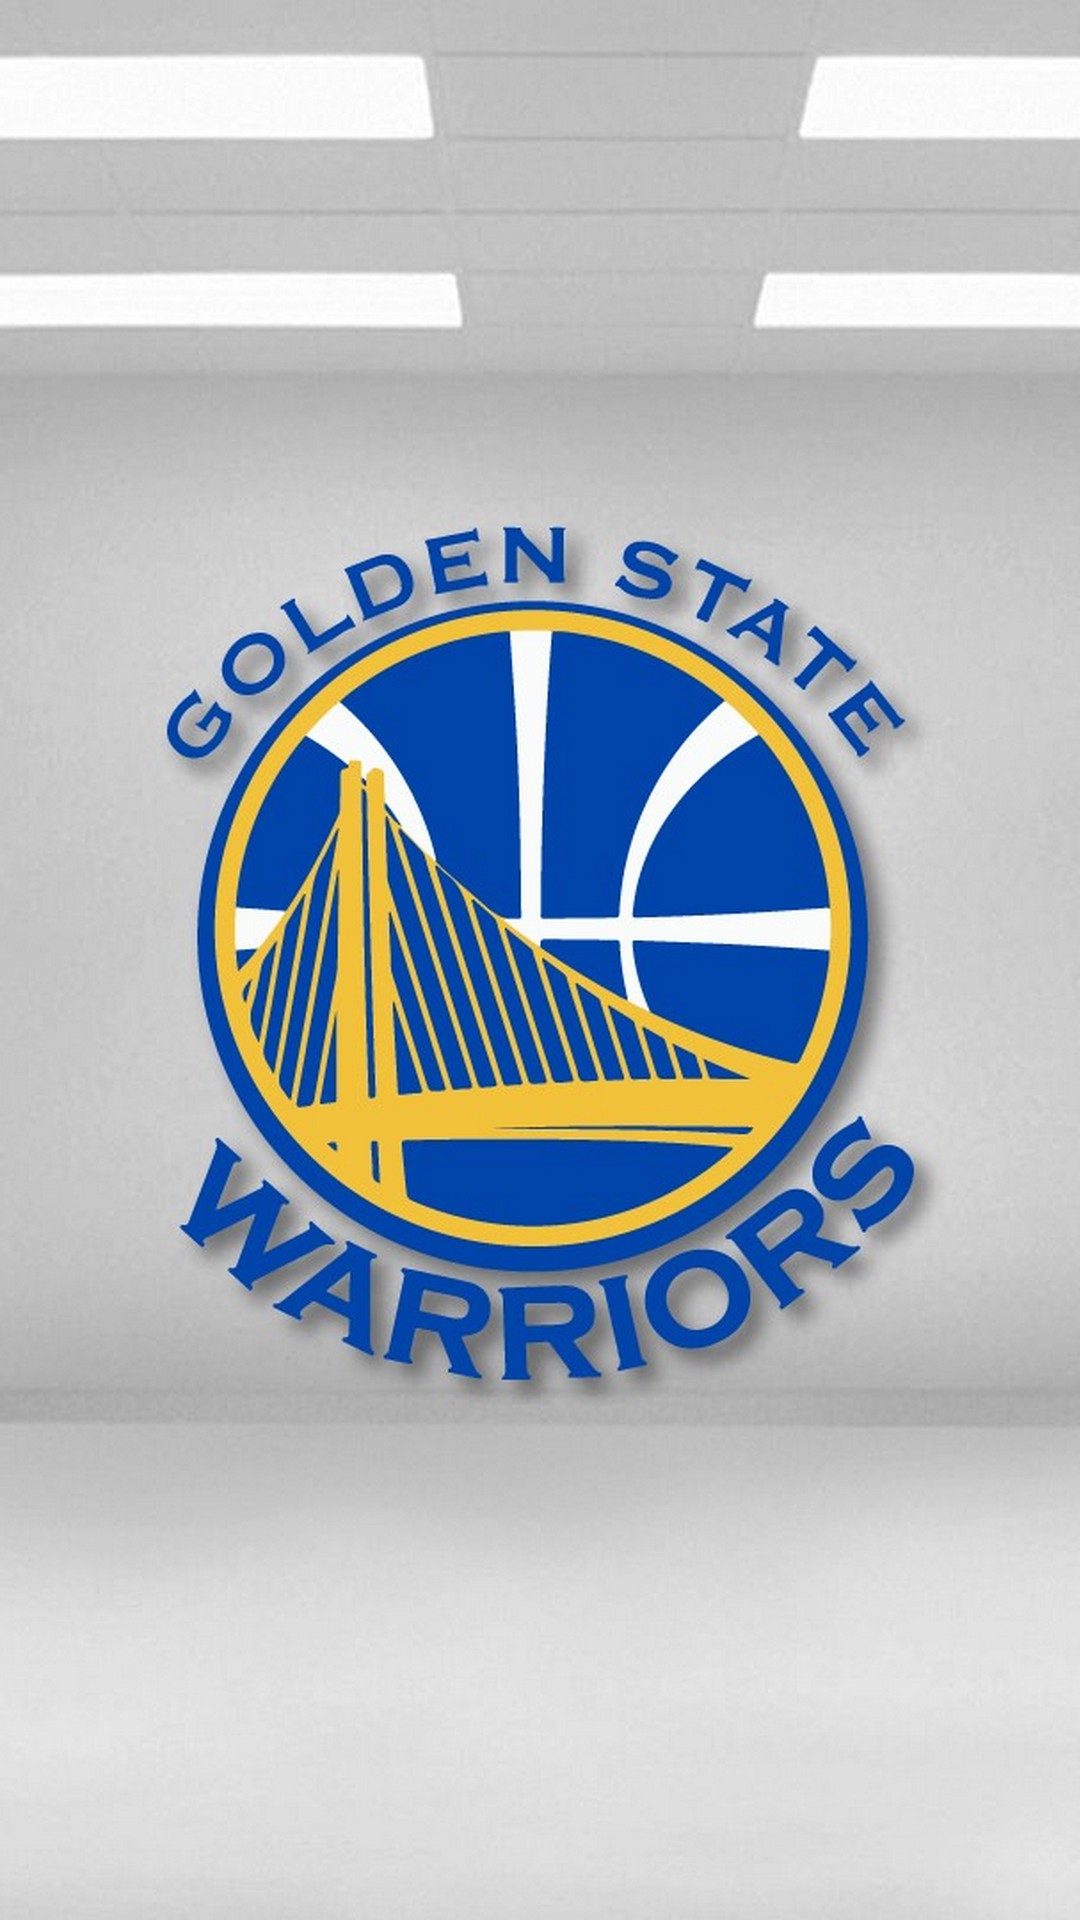 Golden State iPhone X Wallpaper with image dimensions 1080x1920 pixel. You can make this wallpaper for your Desktop Computer Backgrounds, Windows or Mac Screensavers, iPhone Lock screen, Tablet or Android and another Mobile Phone device